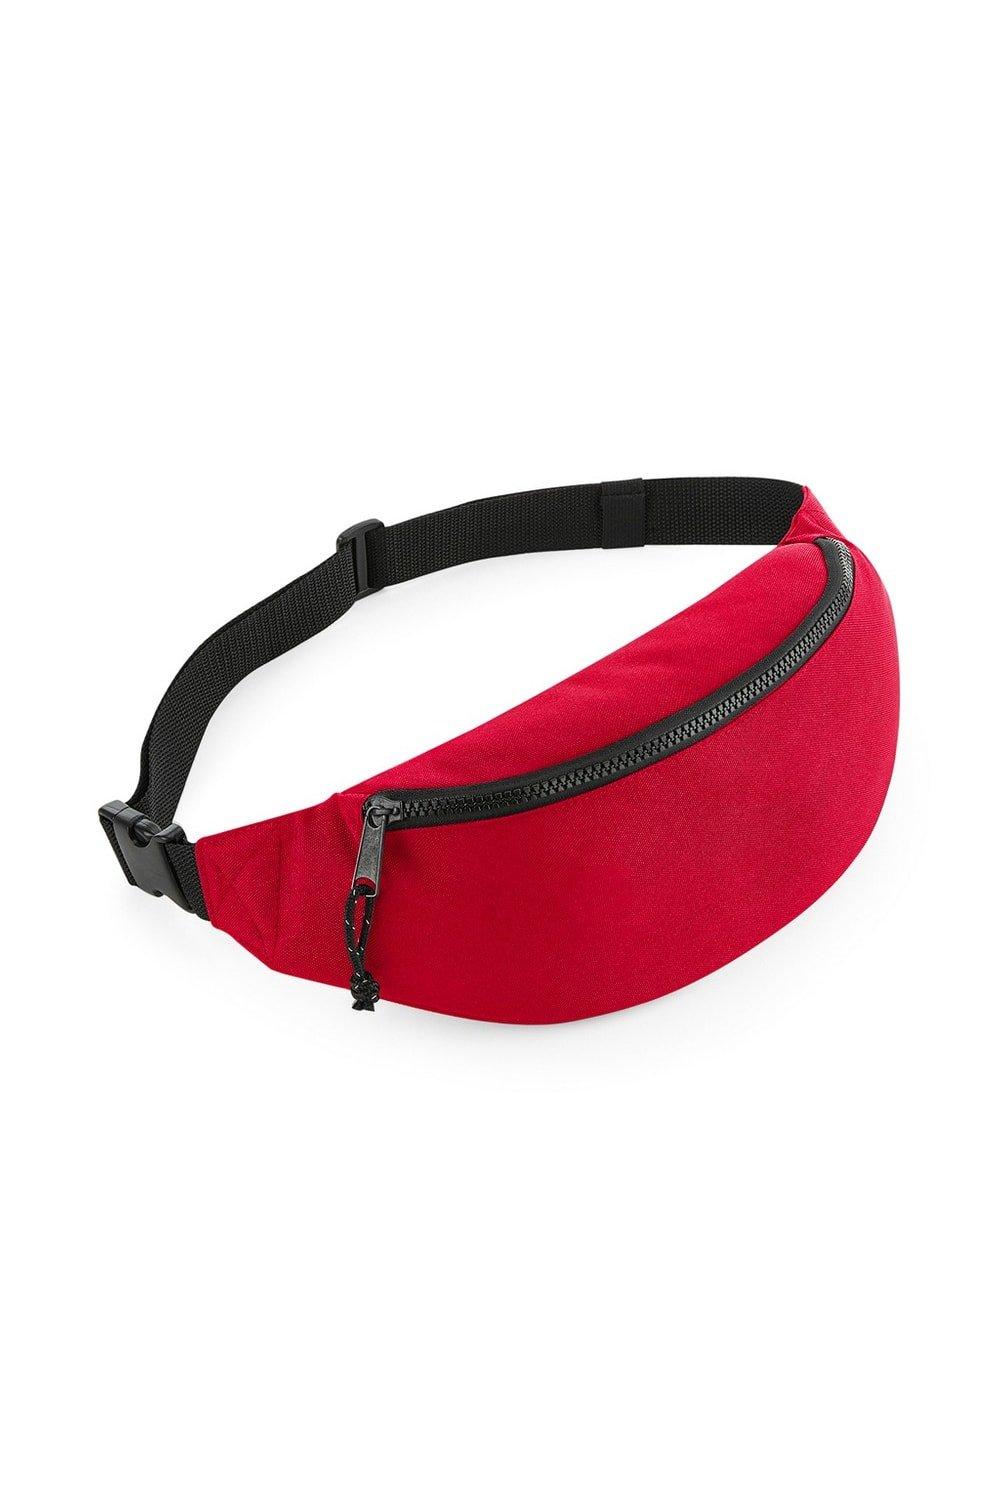 Bagbase Recycled Belt Bag|red